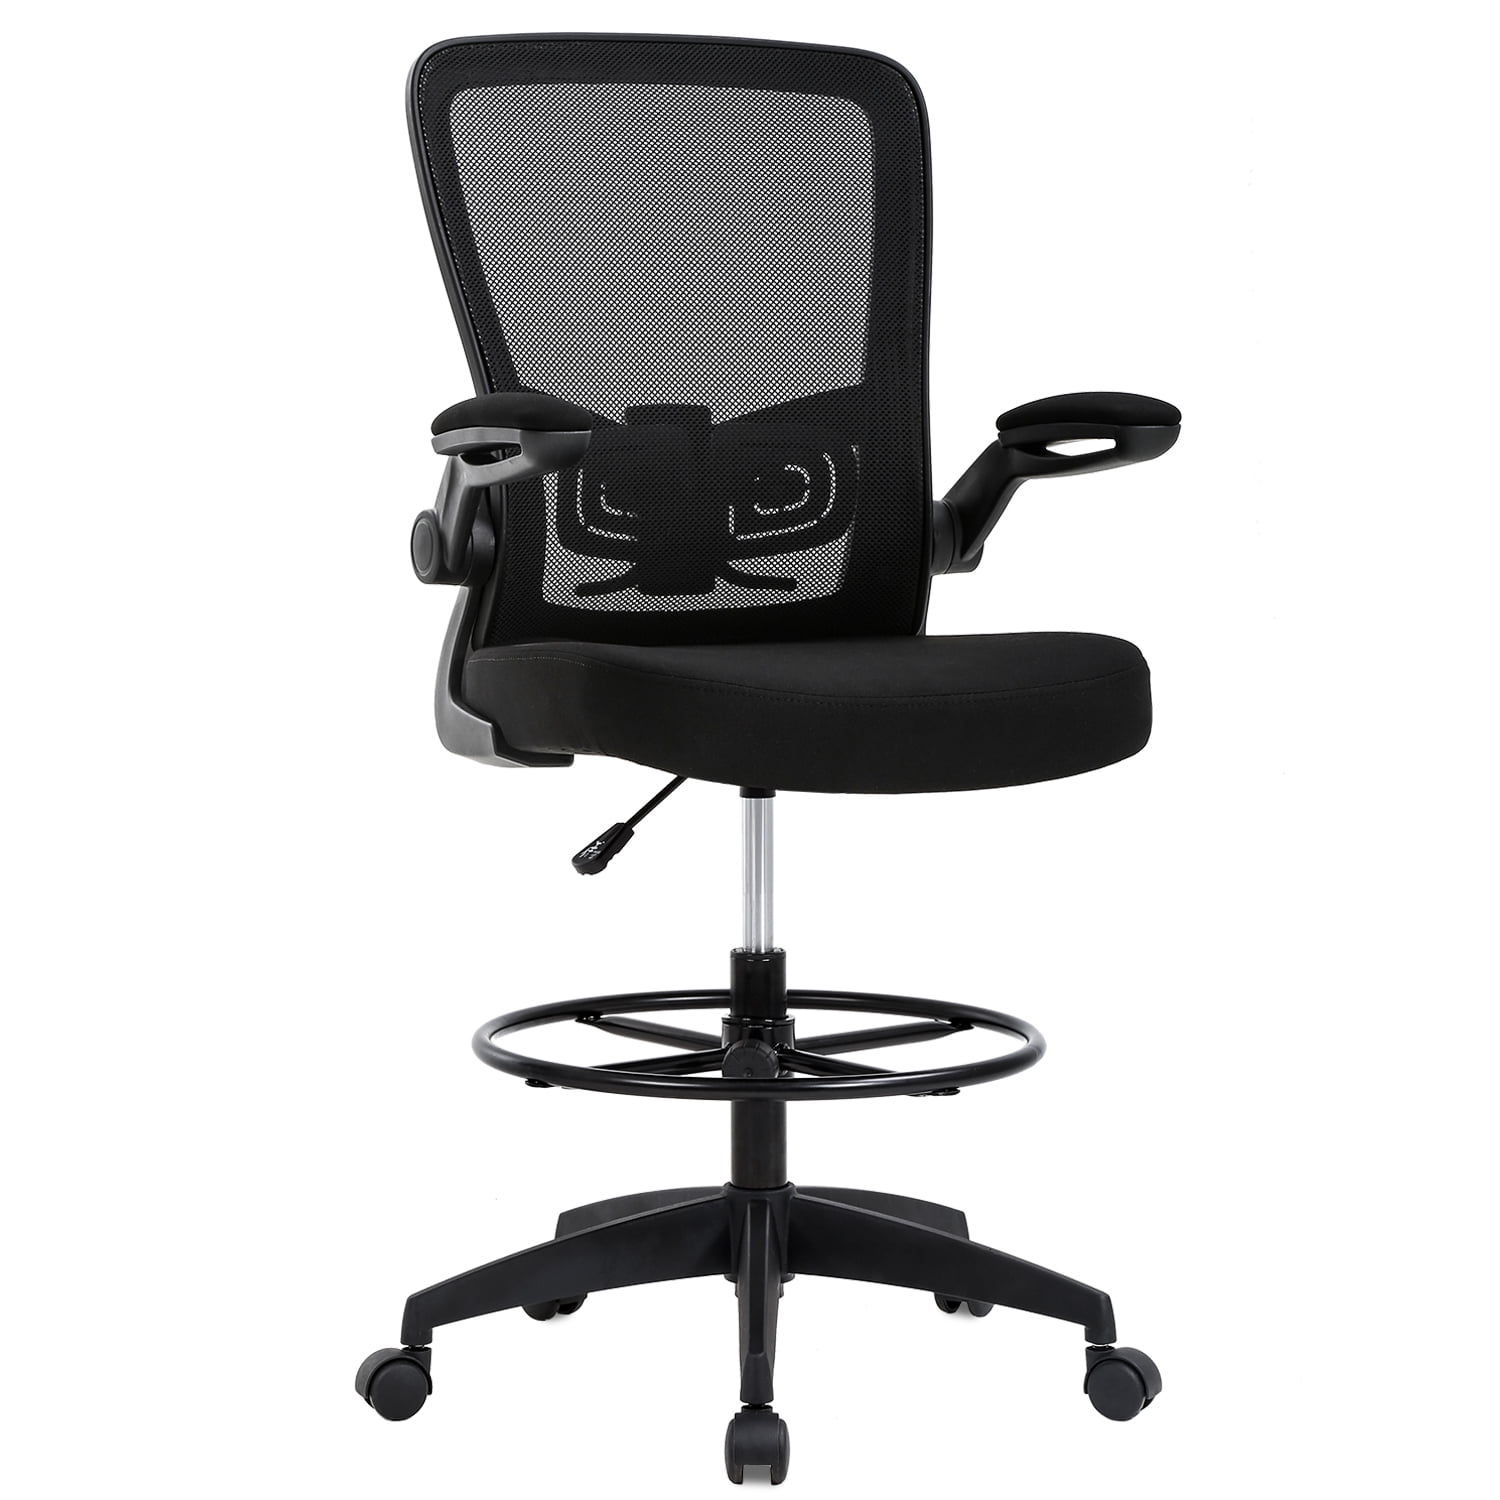 SUPERJARE Drafting Chair with Back, Adjustable Foot Rest, Thick Seat C